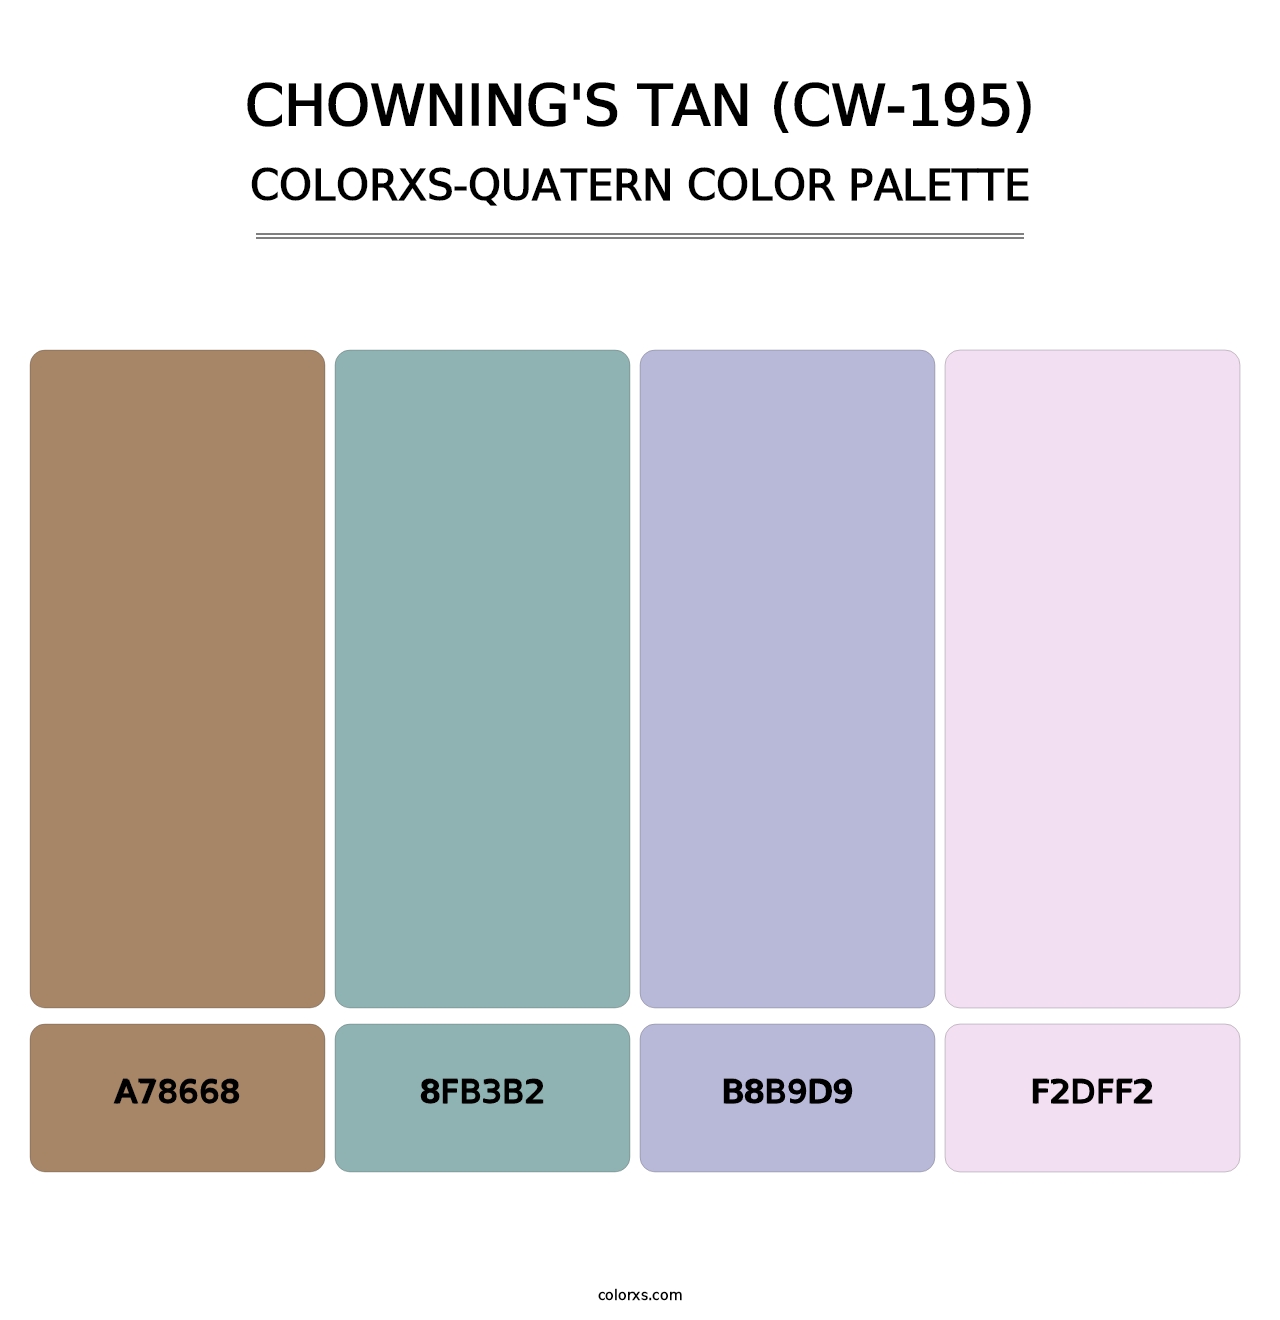 Chowning's Tan (CW-195) - Colorxs Quatern Palette